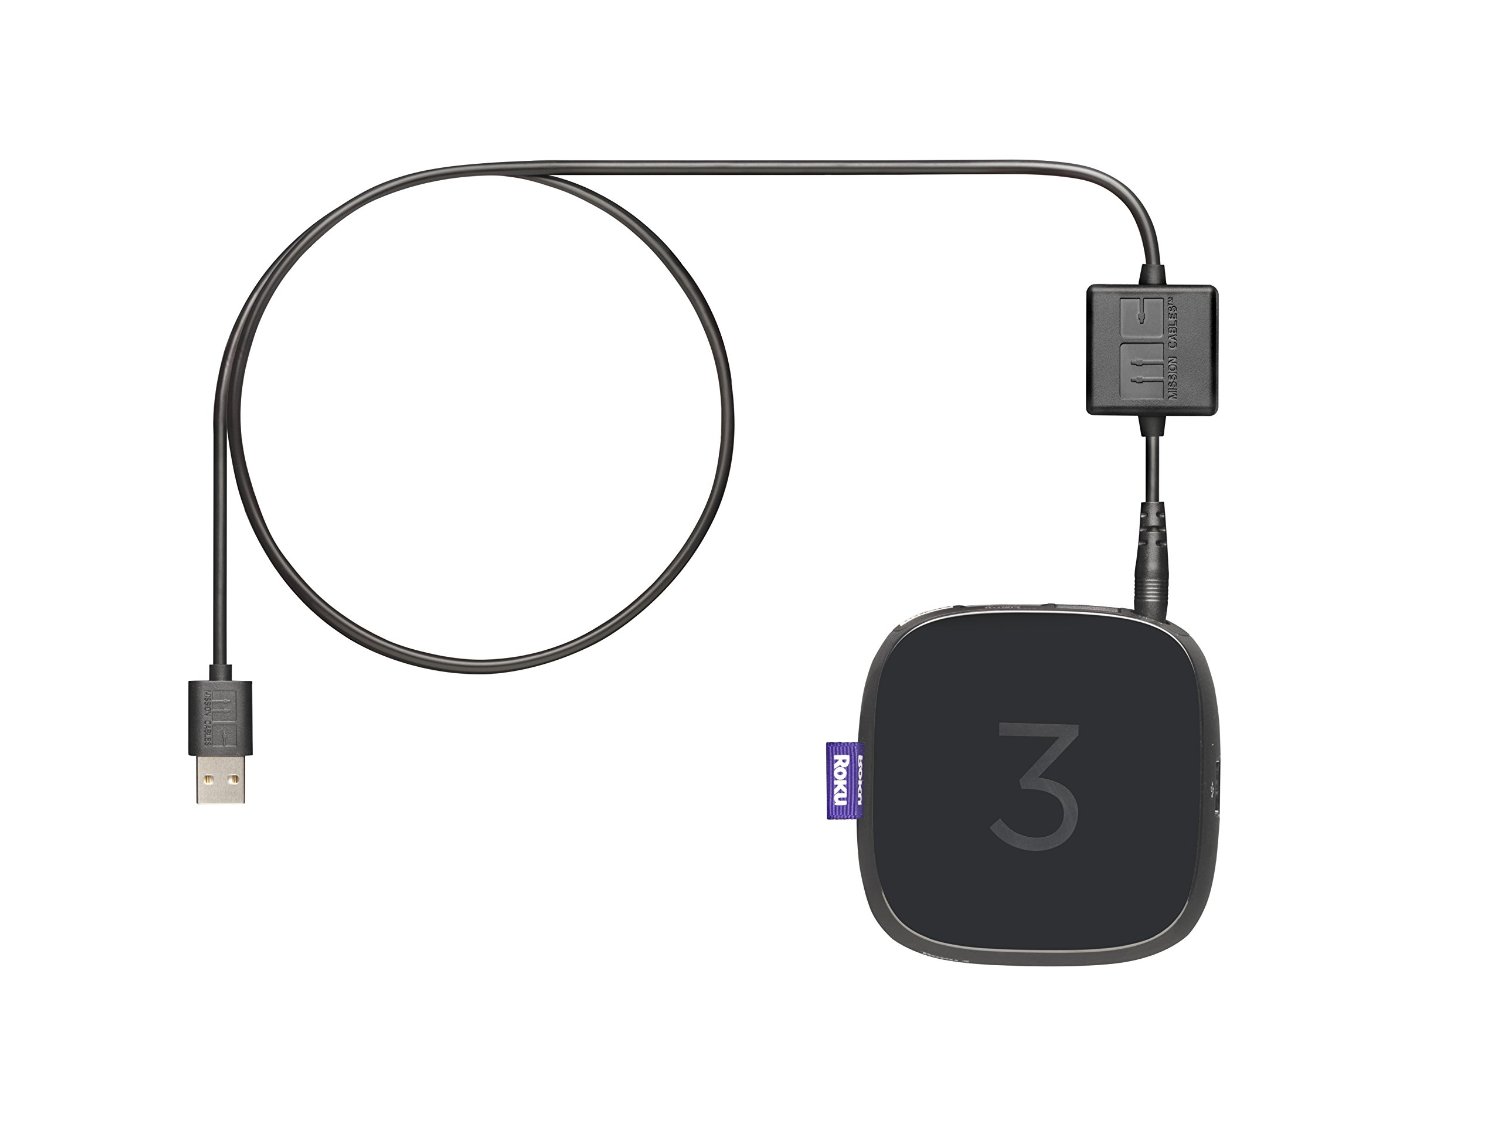 How to Power Your Roku with a USB Cable